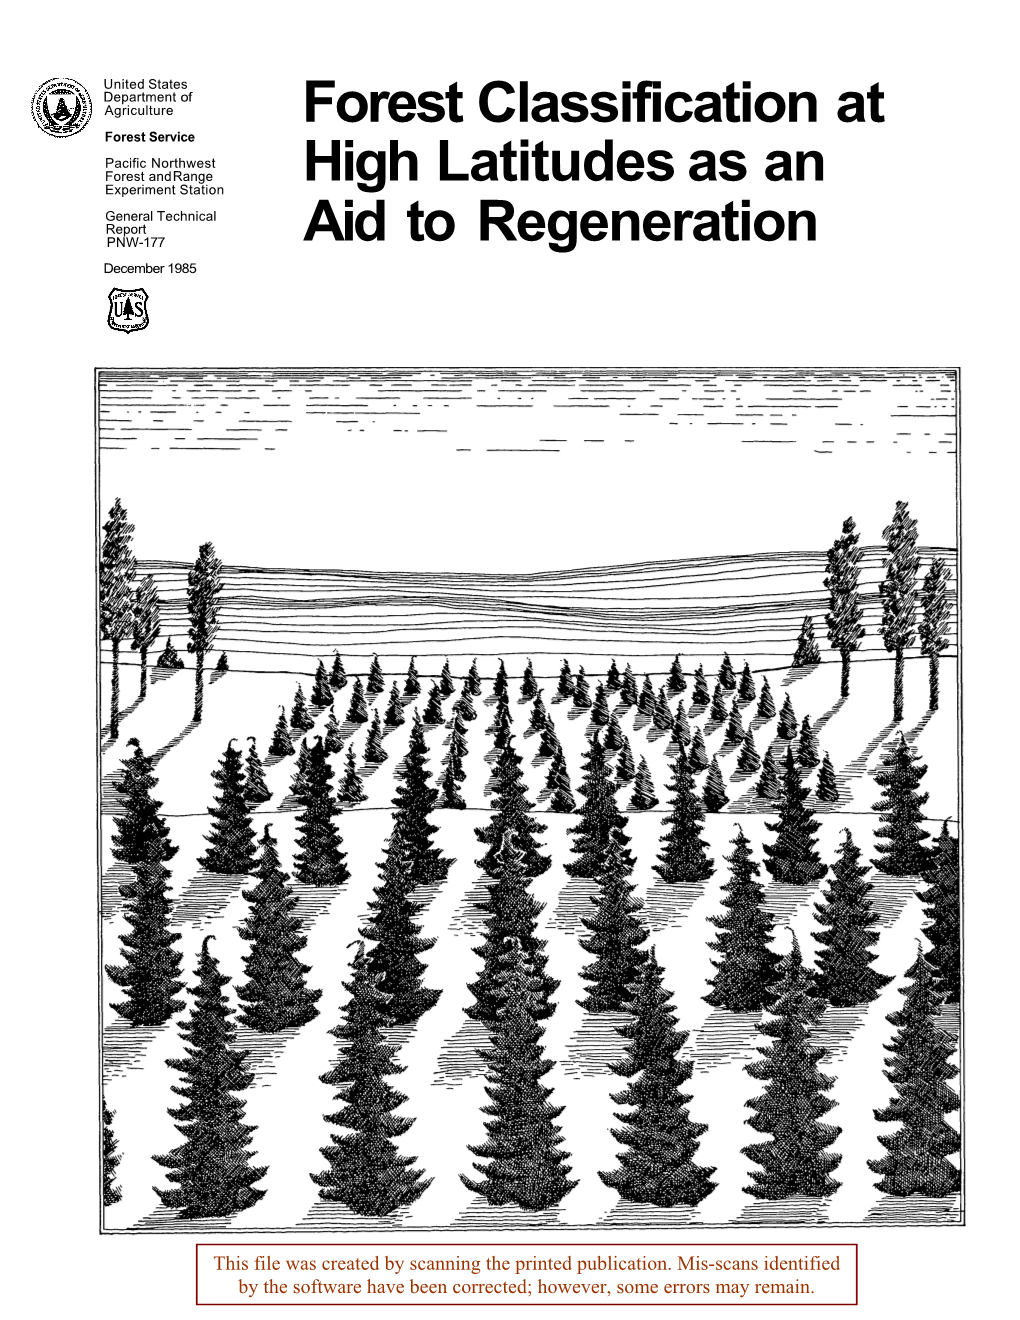 Forest Classification at High Latitudes As an Aid to Regeneration